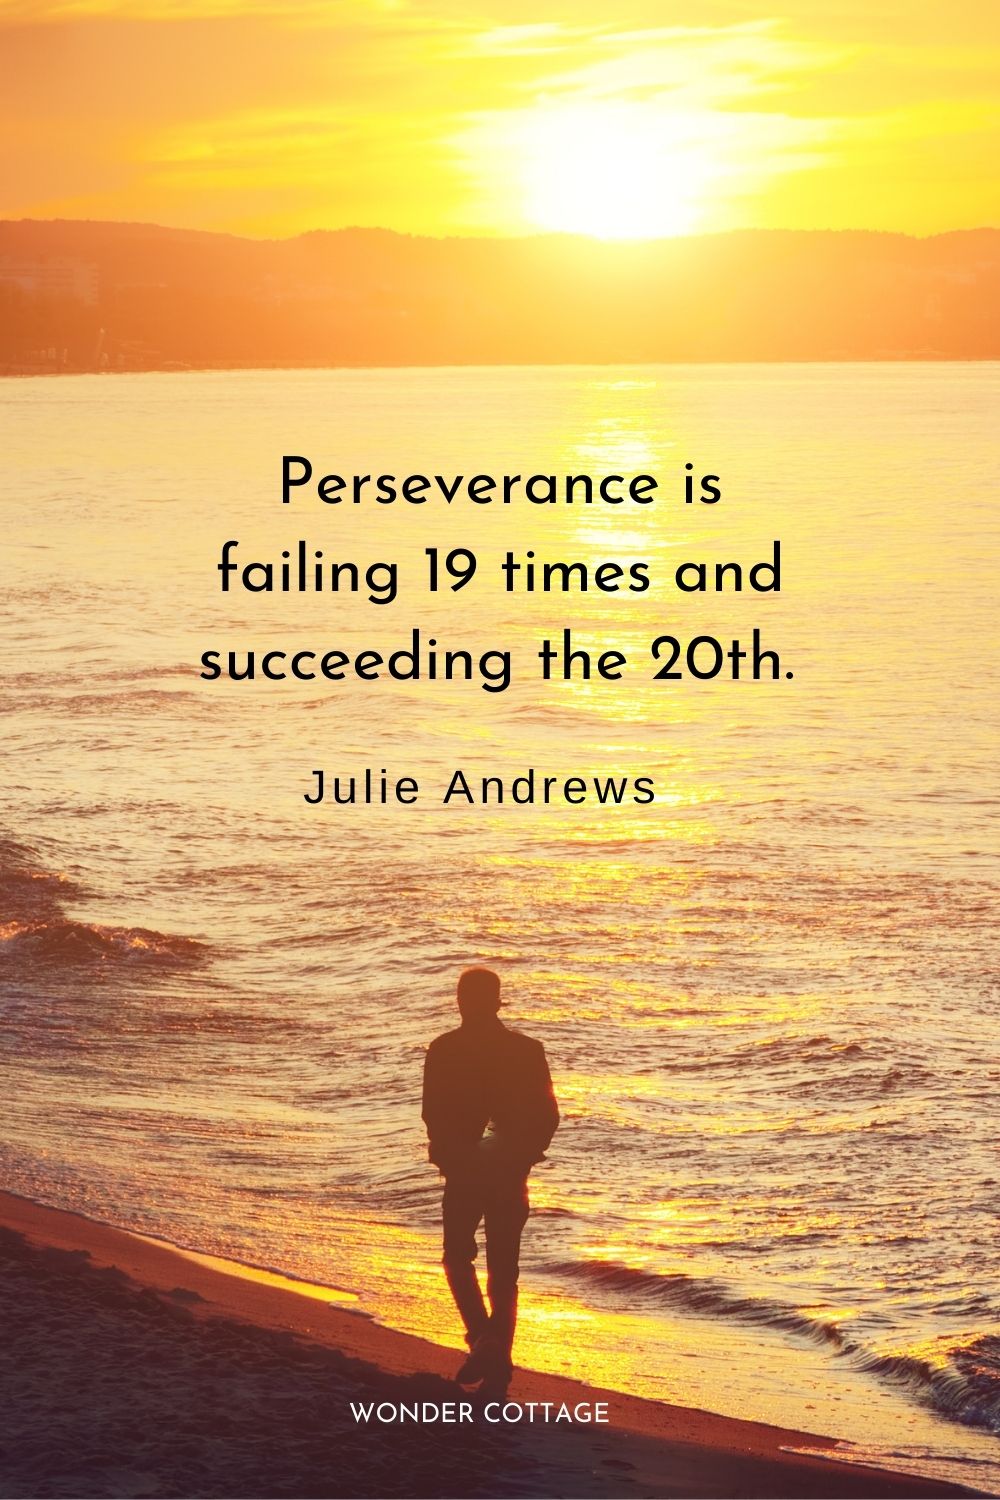 Perseverance is failing 19 times and succeeding the 20th.  Julie Andrews